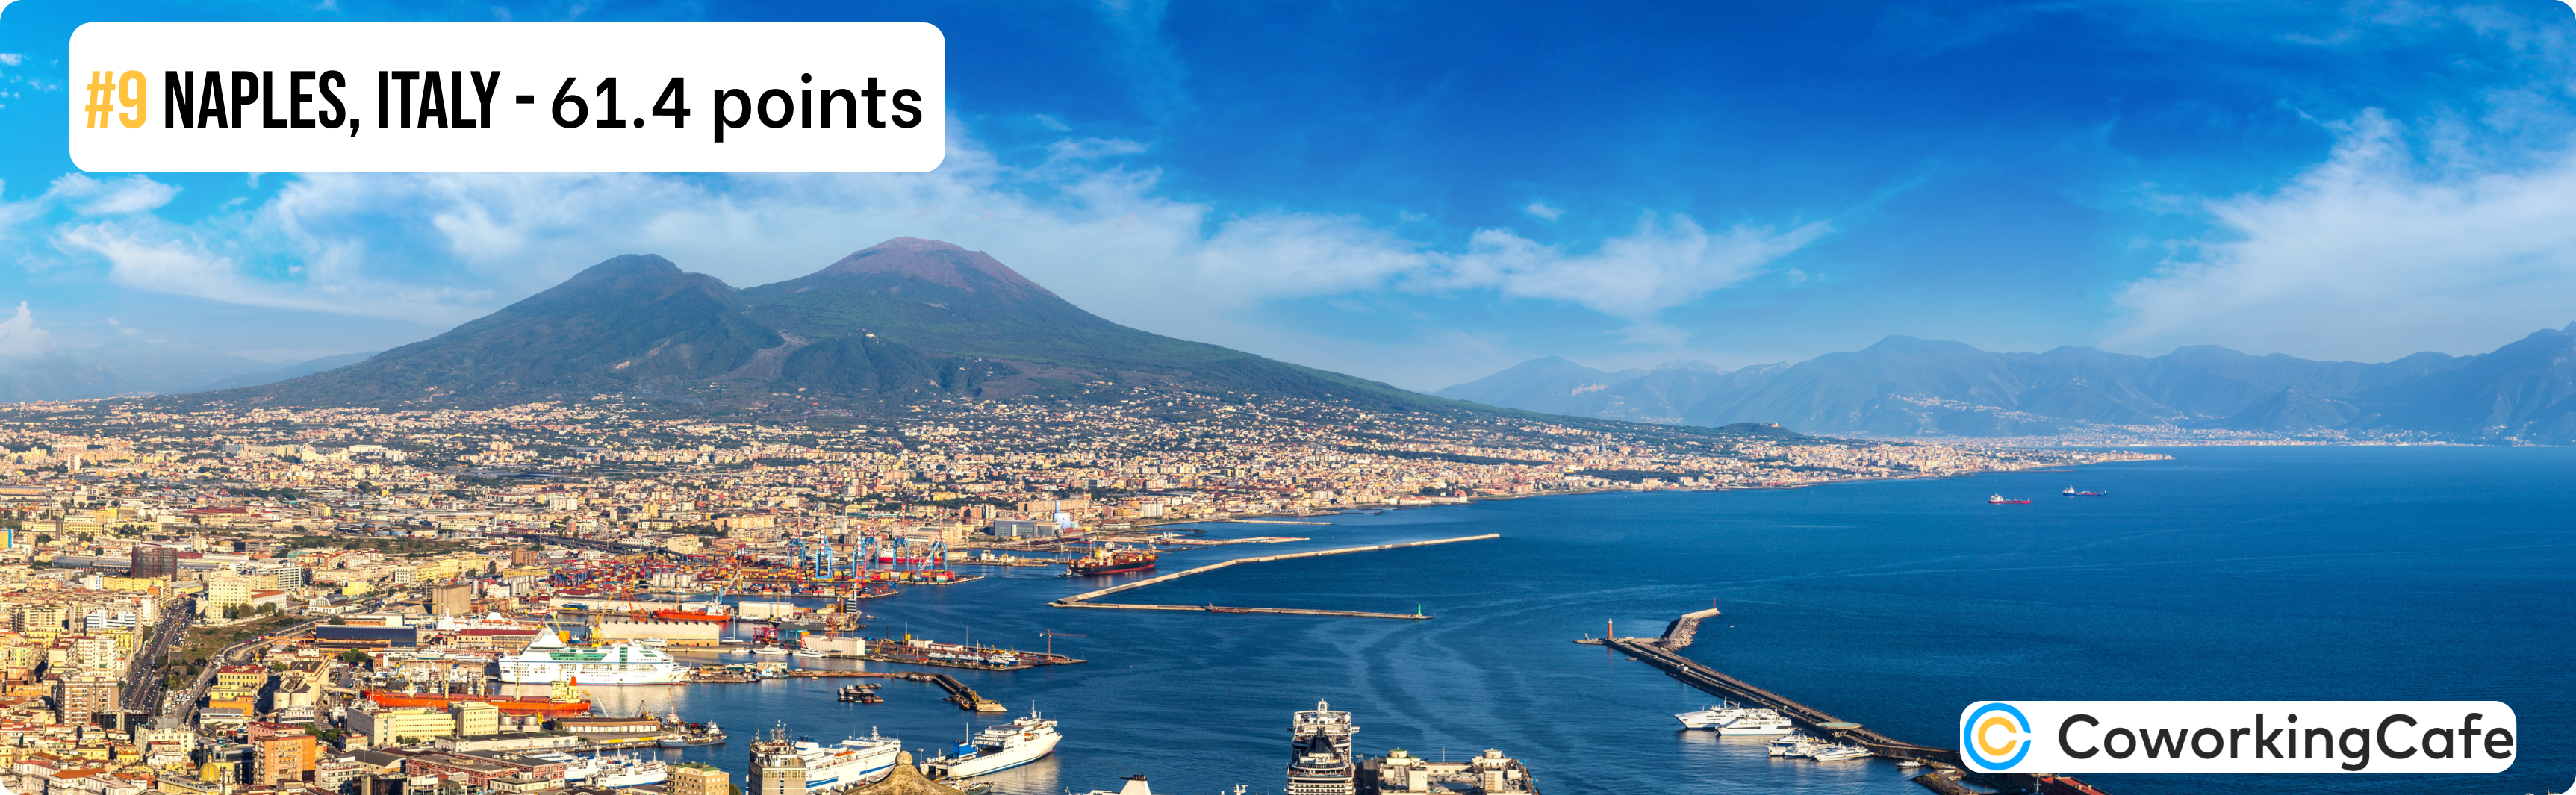 Naples, Italy – Total Points: 61.4